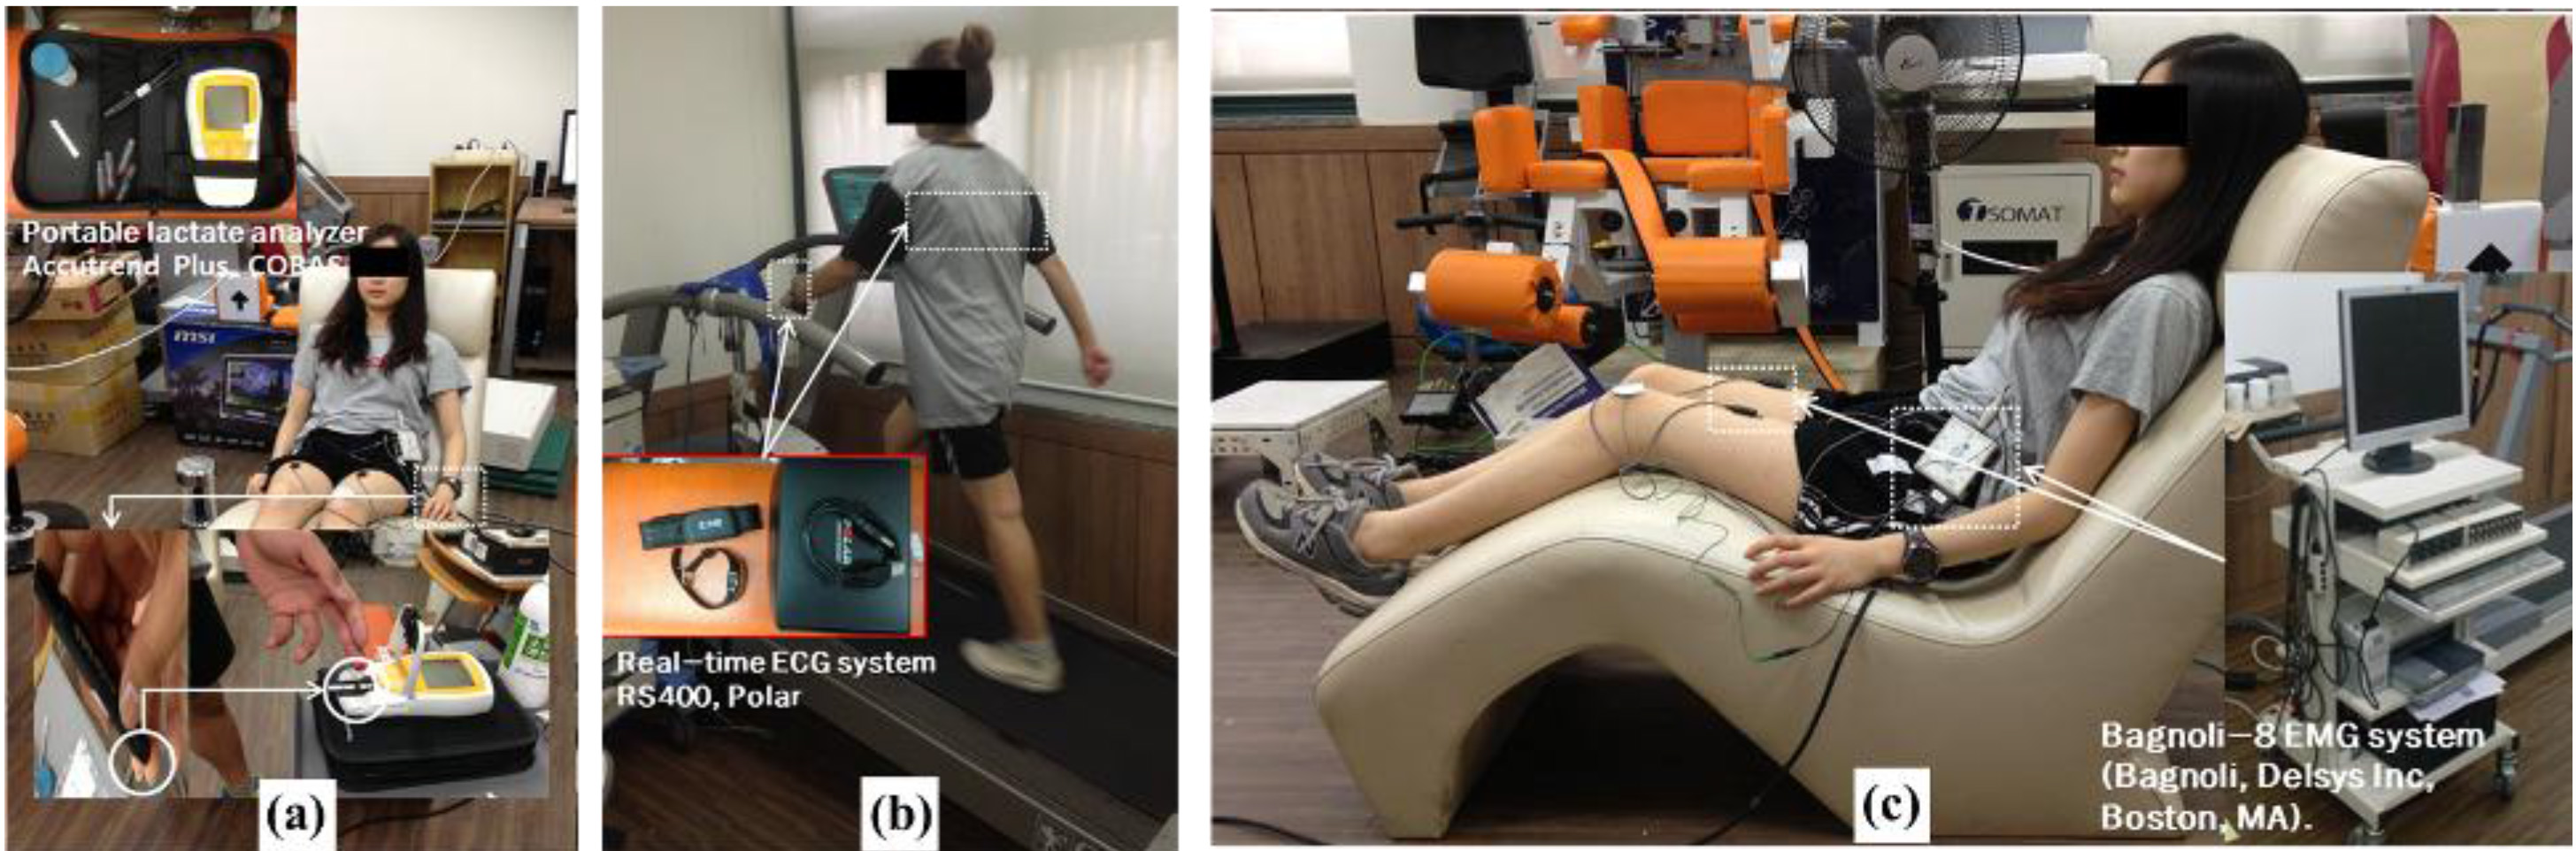 Measurement performed in all sessions (a): measurement of blood lactate levels using a portable lactate analyzer, (b): measurement of HRR using a real-time ECG system, (c): measurement of SEF 50 for muscular activity using a real-time EMG system (Bagnoli, Delsys Inc., Boston, MA).